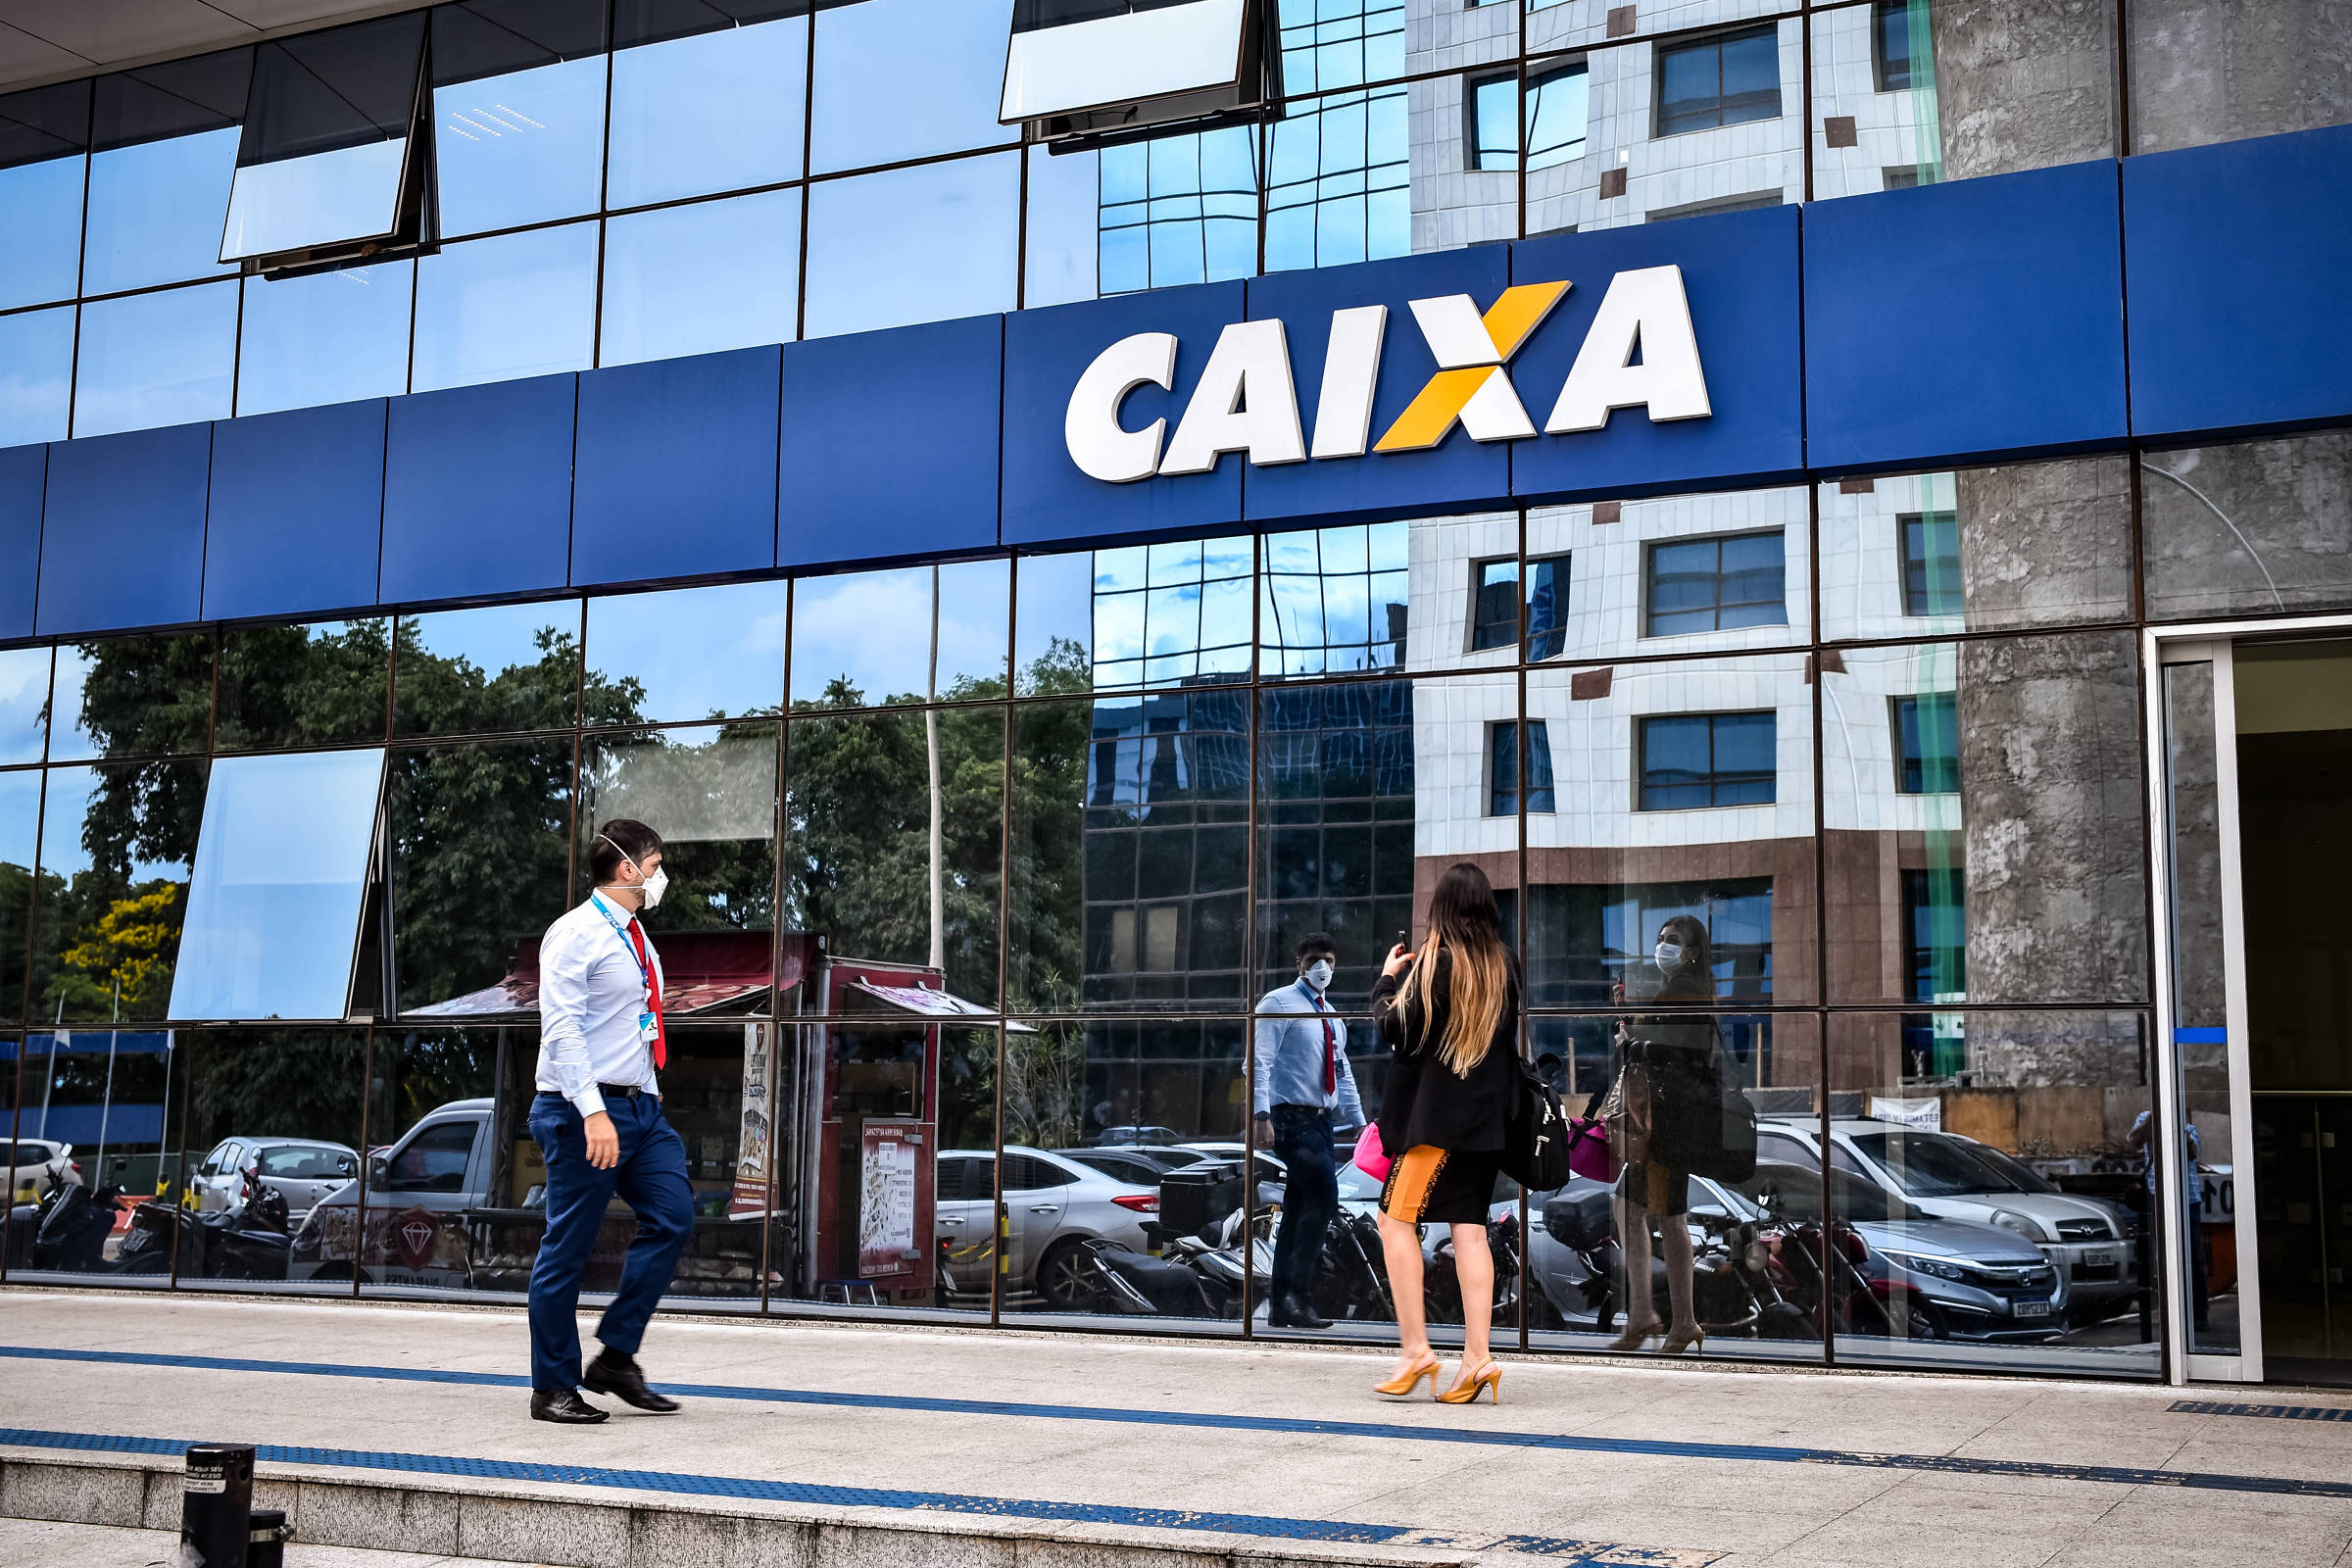 Caixa registers a record of absences in 2022, says study – 07/23/2023 – Mônica Bergamo